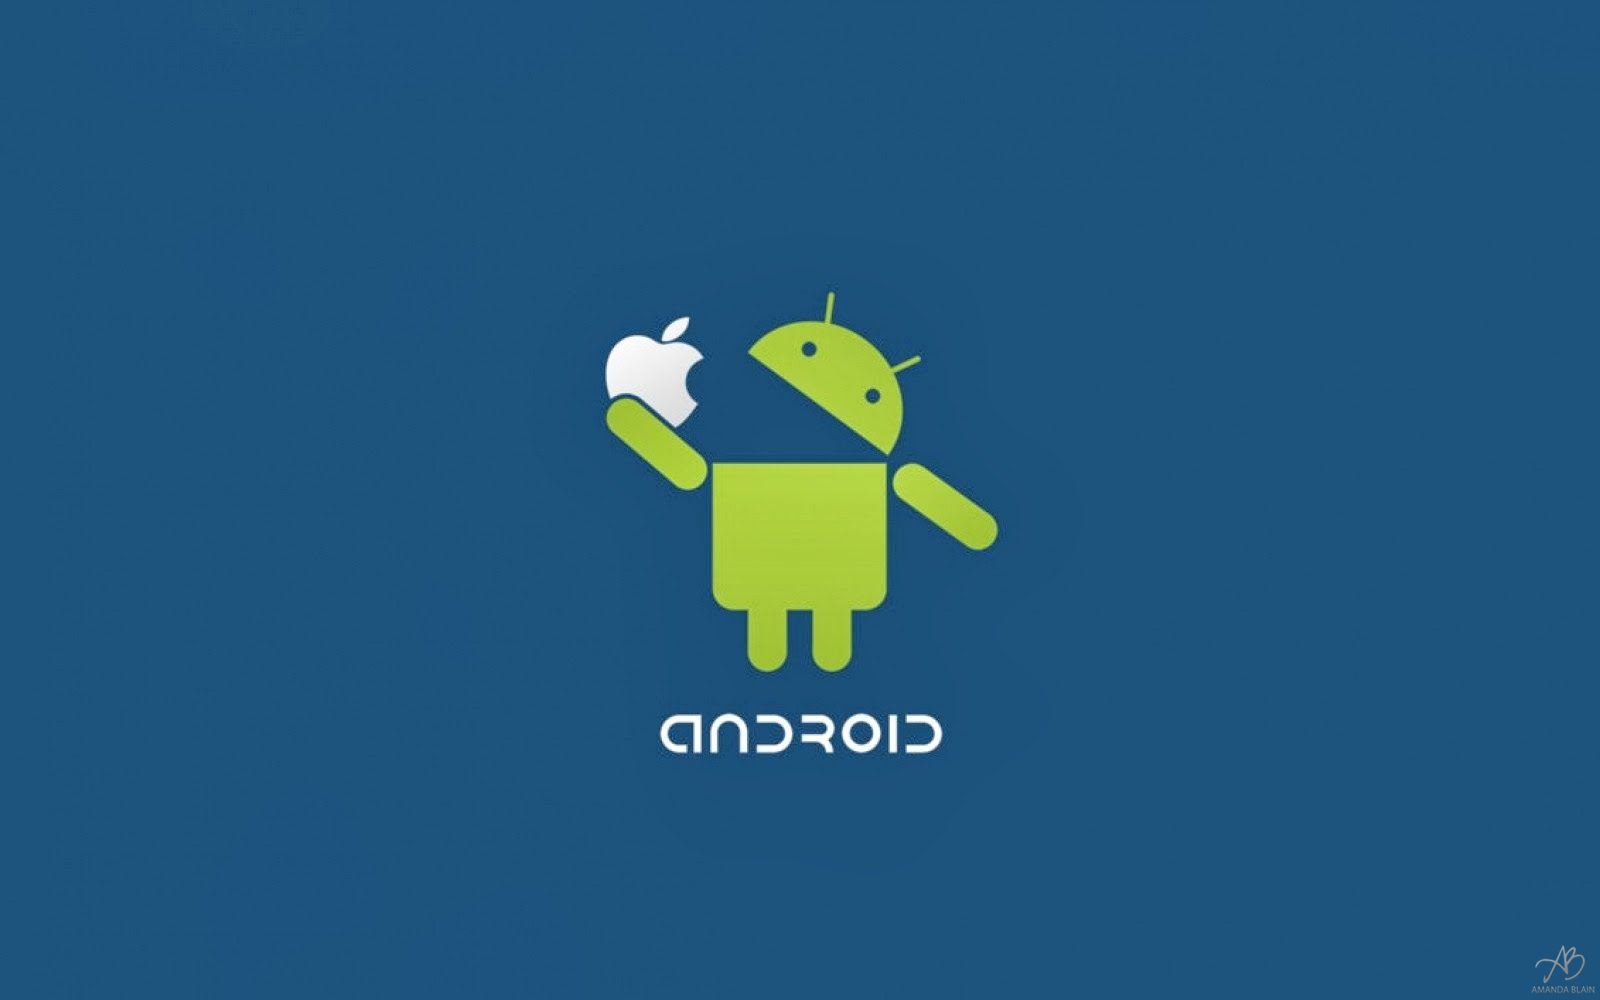 Android Vs Apple - The War Continues